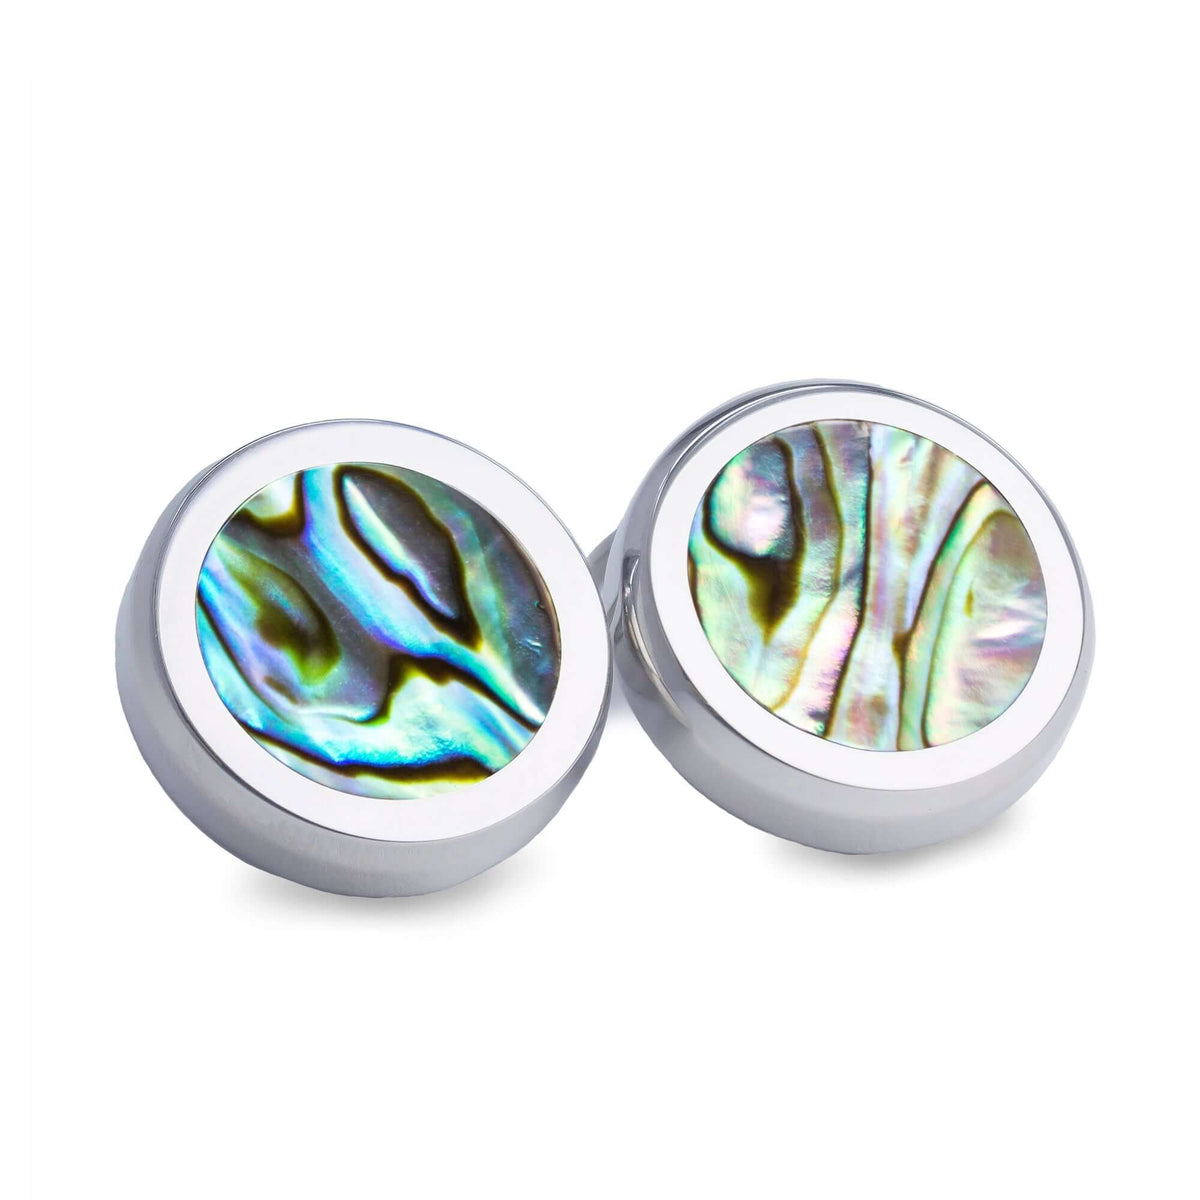 Abalone Shell Pearl Button Covers-Button Covers-A.Azthom-Cufflinks.com.sg